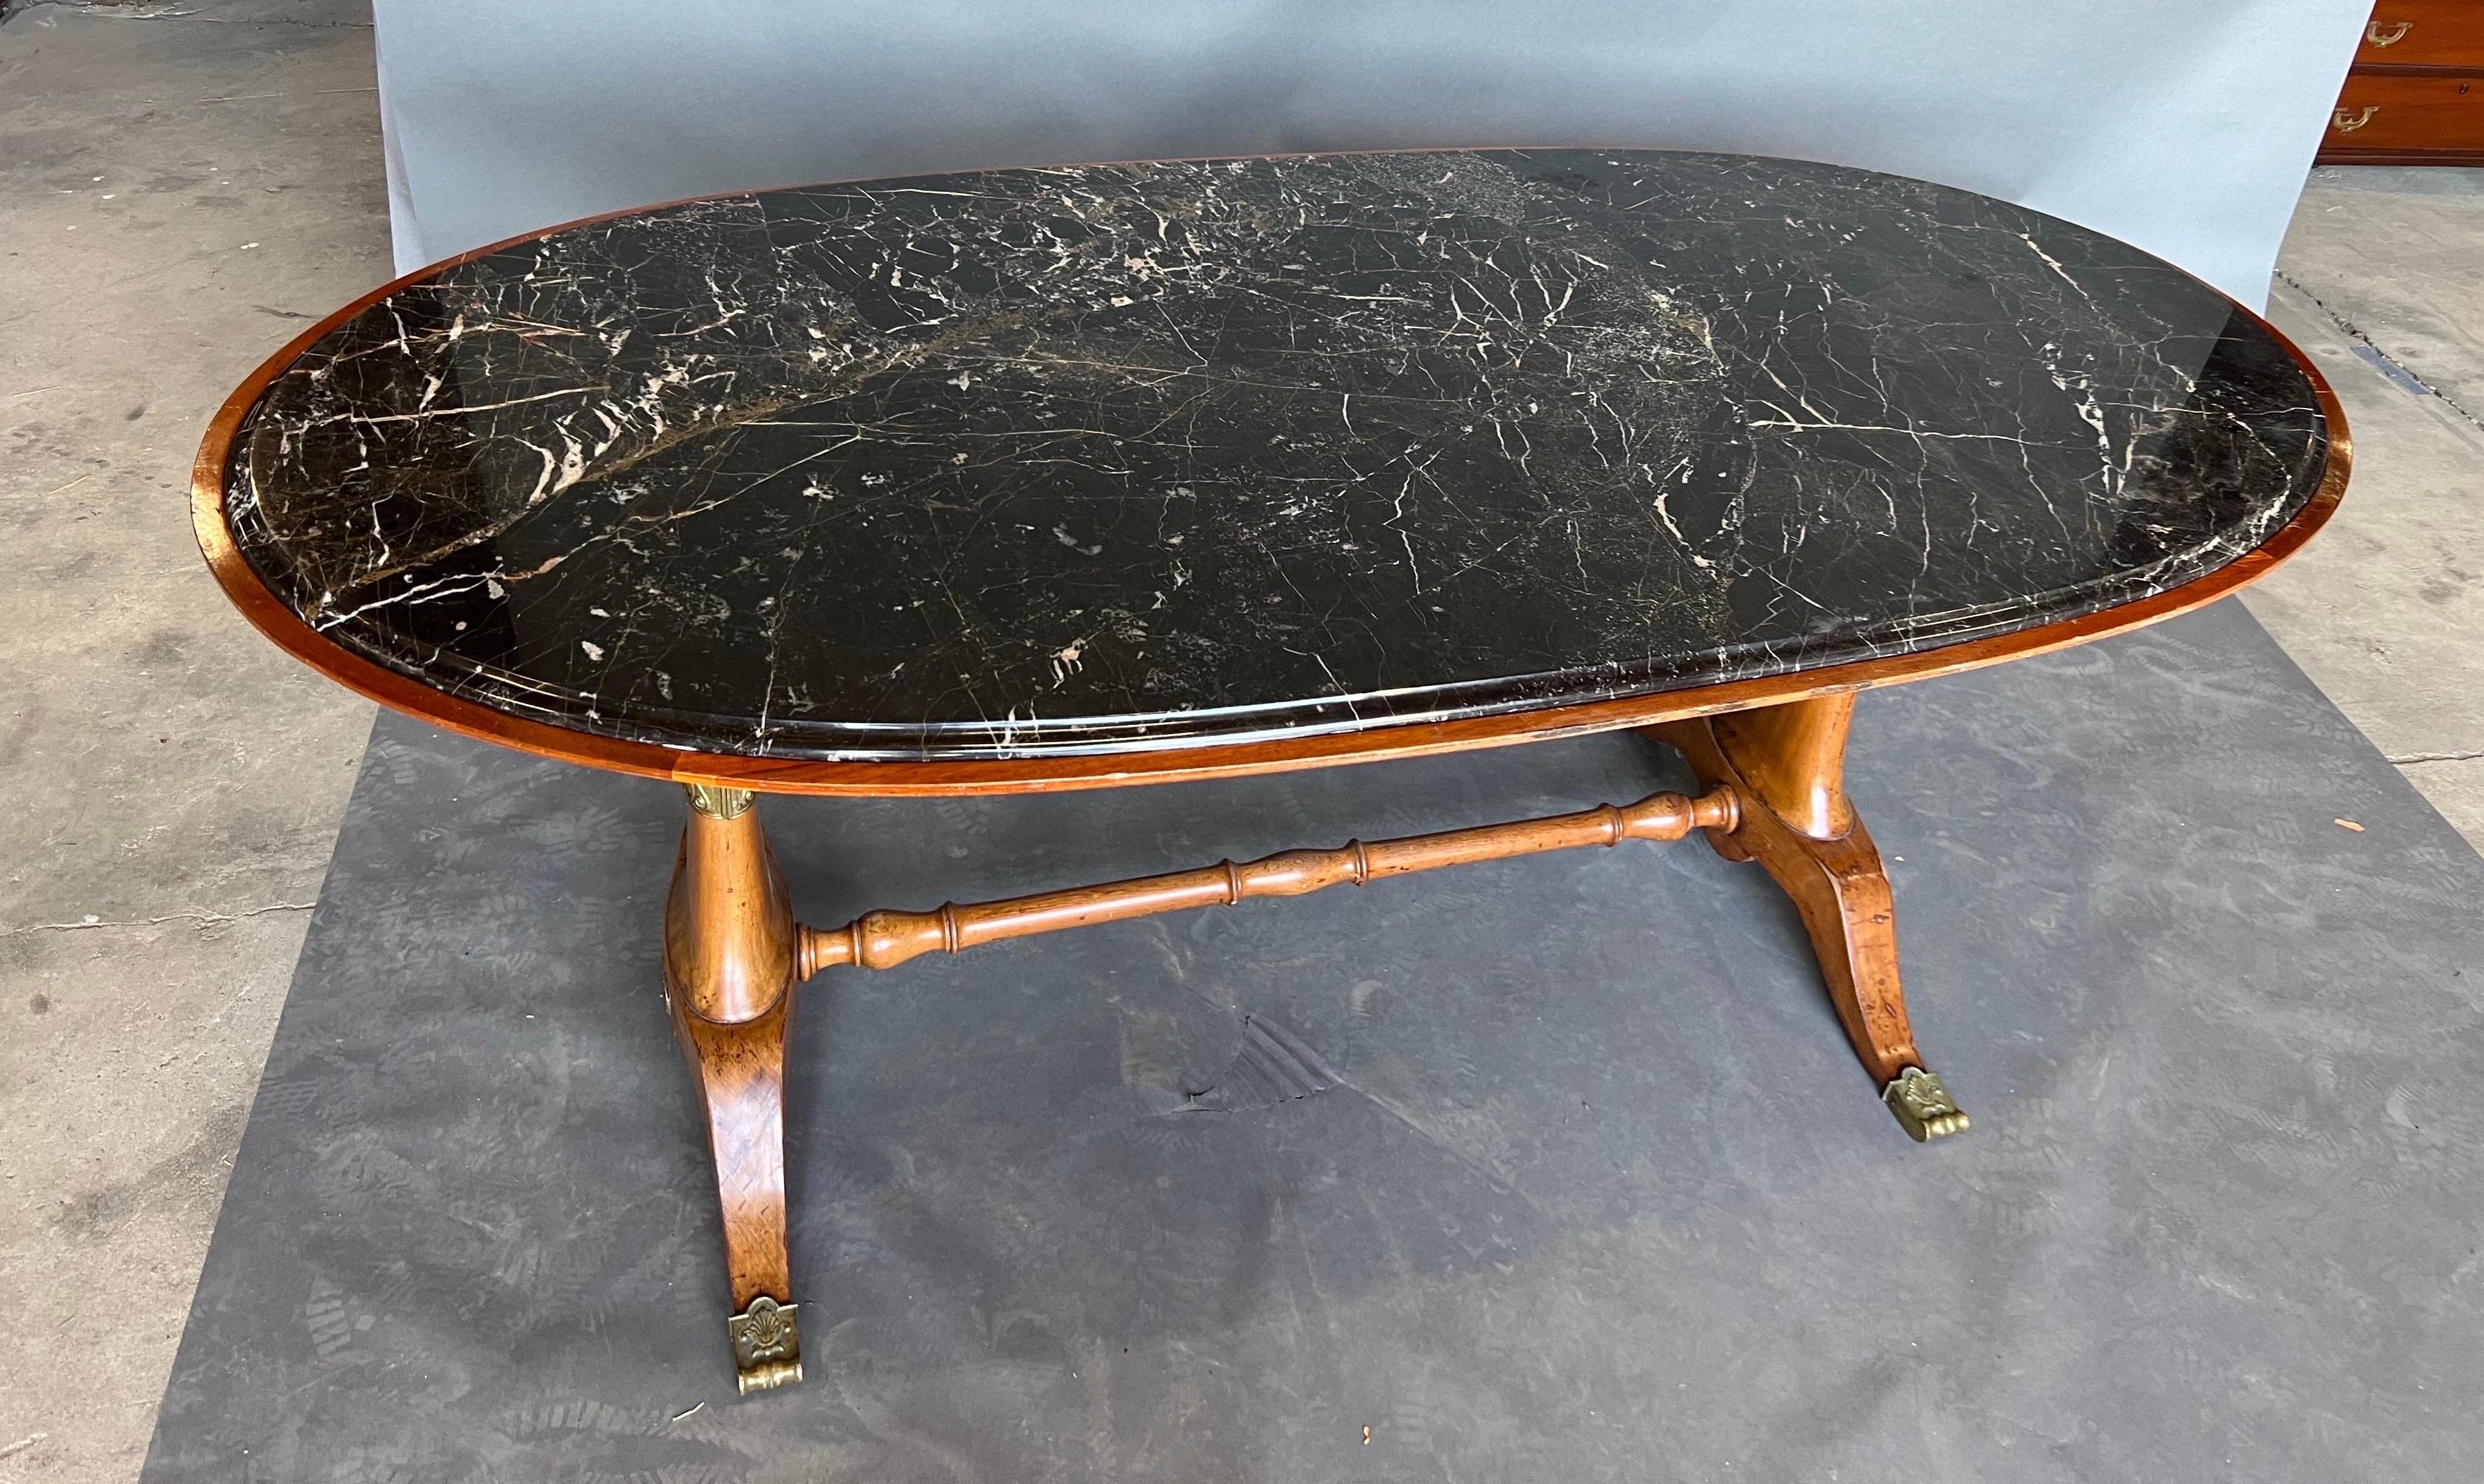 Art Deco Period Walnut and Marble Table with Bronze Appliqués In Good Condition For Sale In Charleston, SC